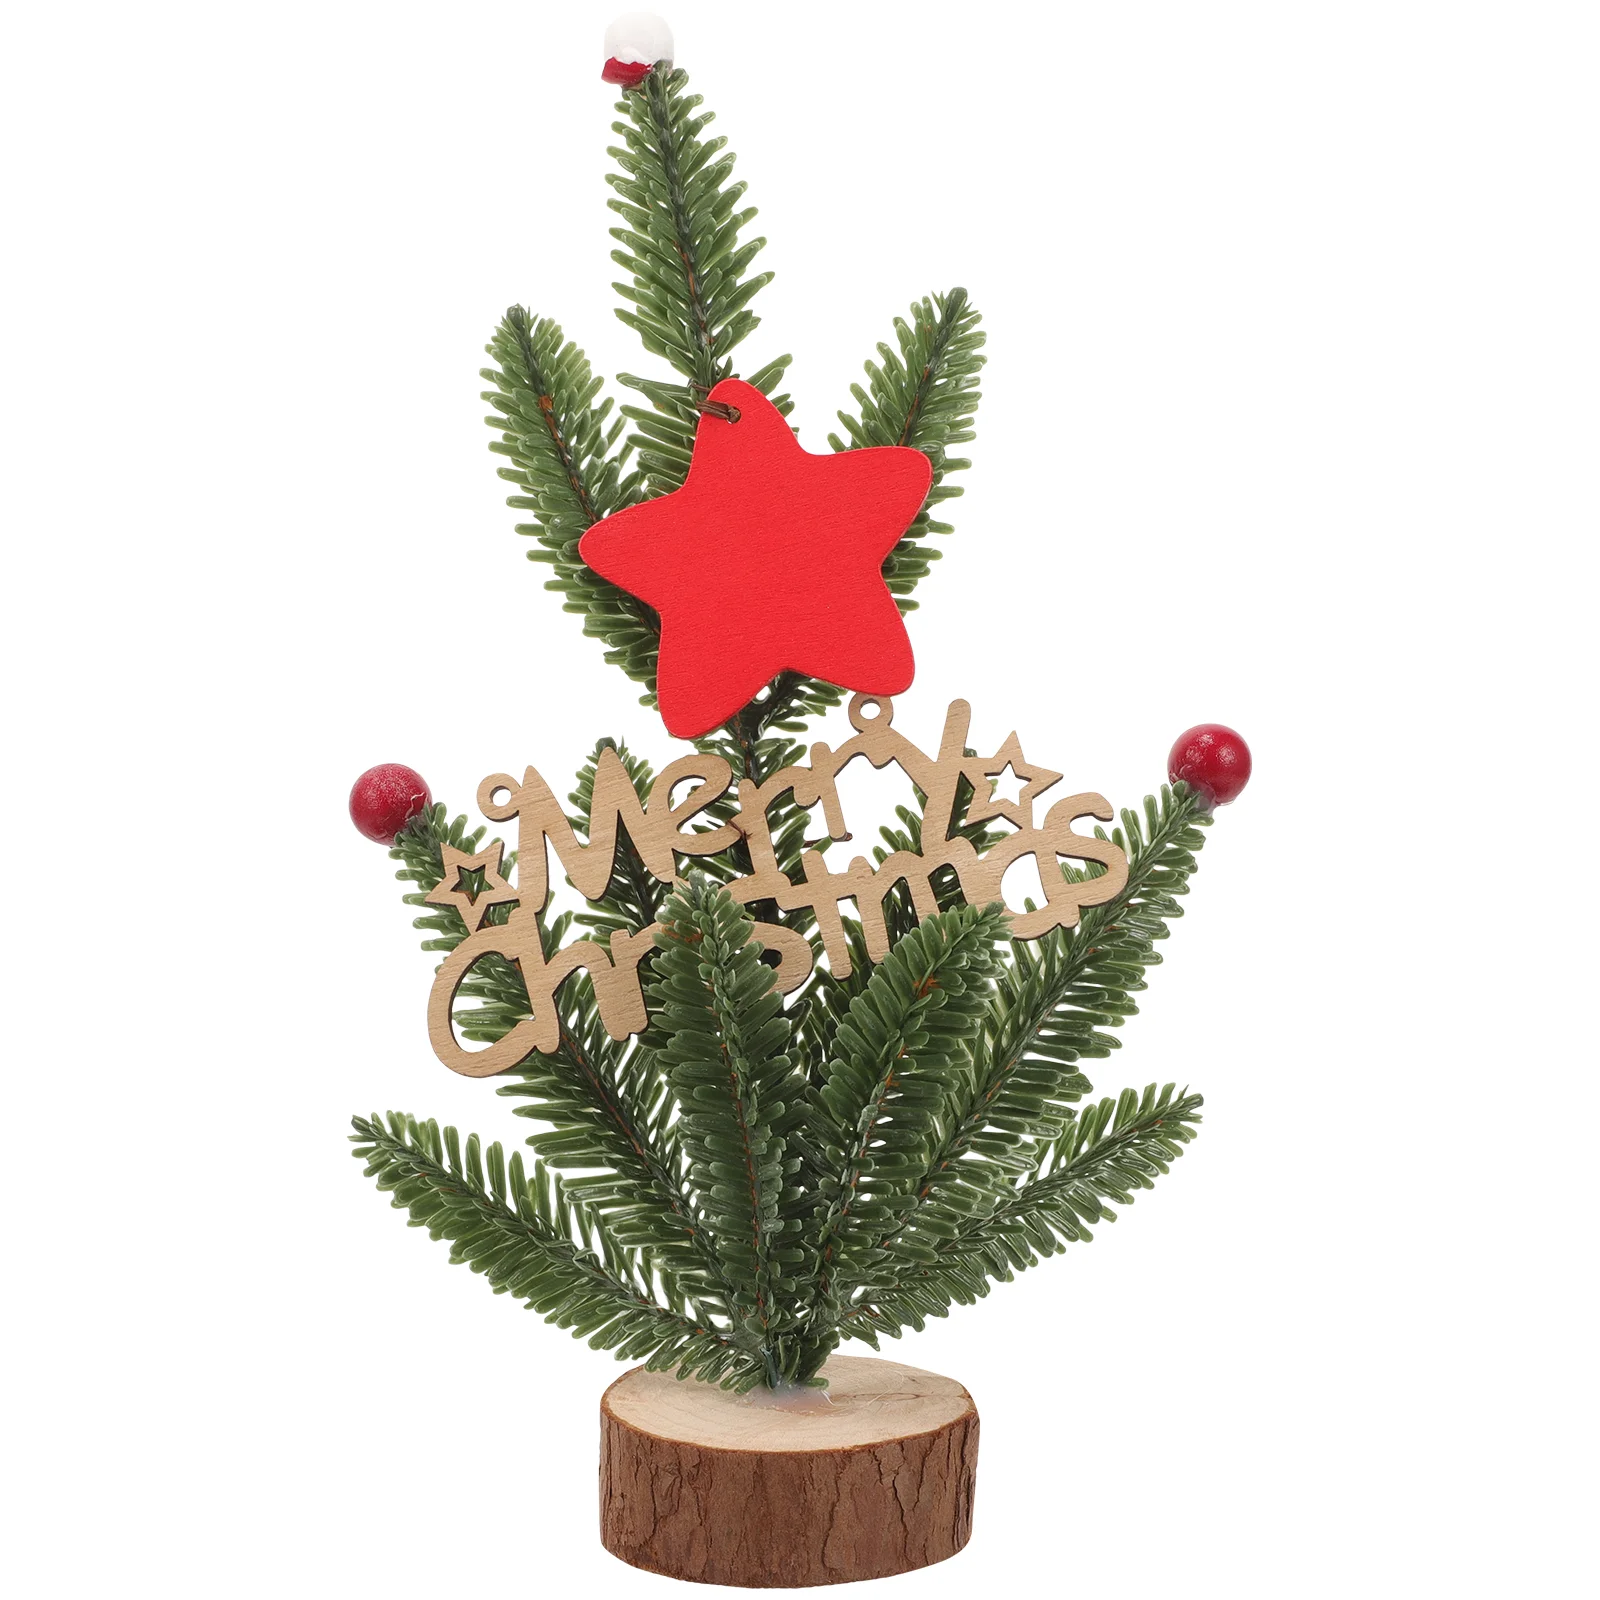 

Christmas Table Decor Wooden Tree Modeling Home Xmas Decorations Lovely Adorn Pine Needles Adornment